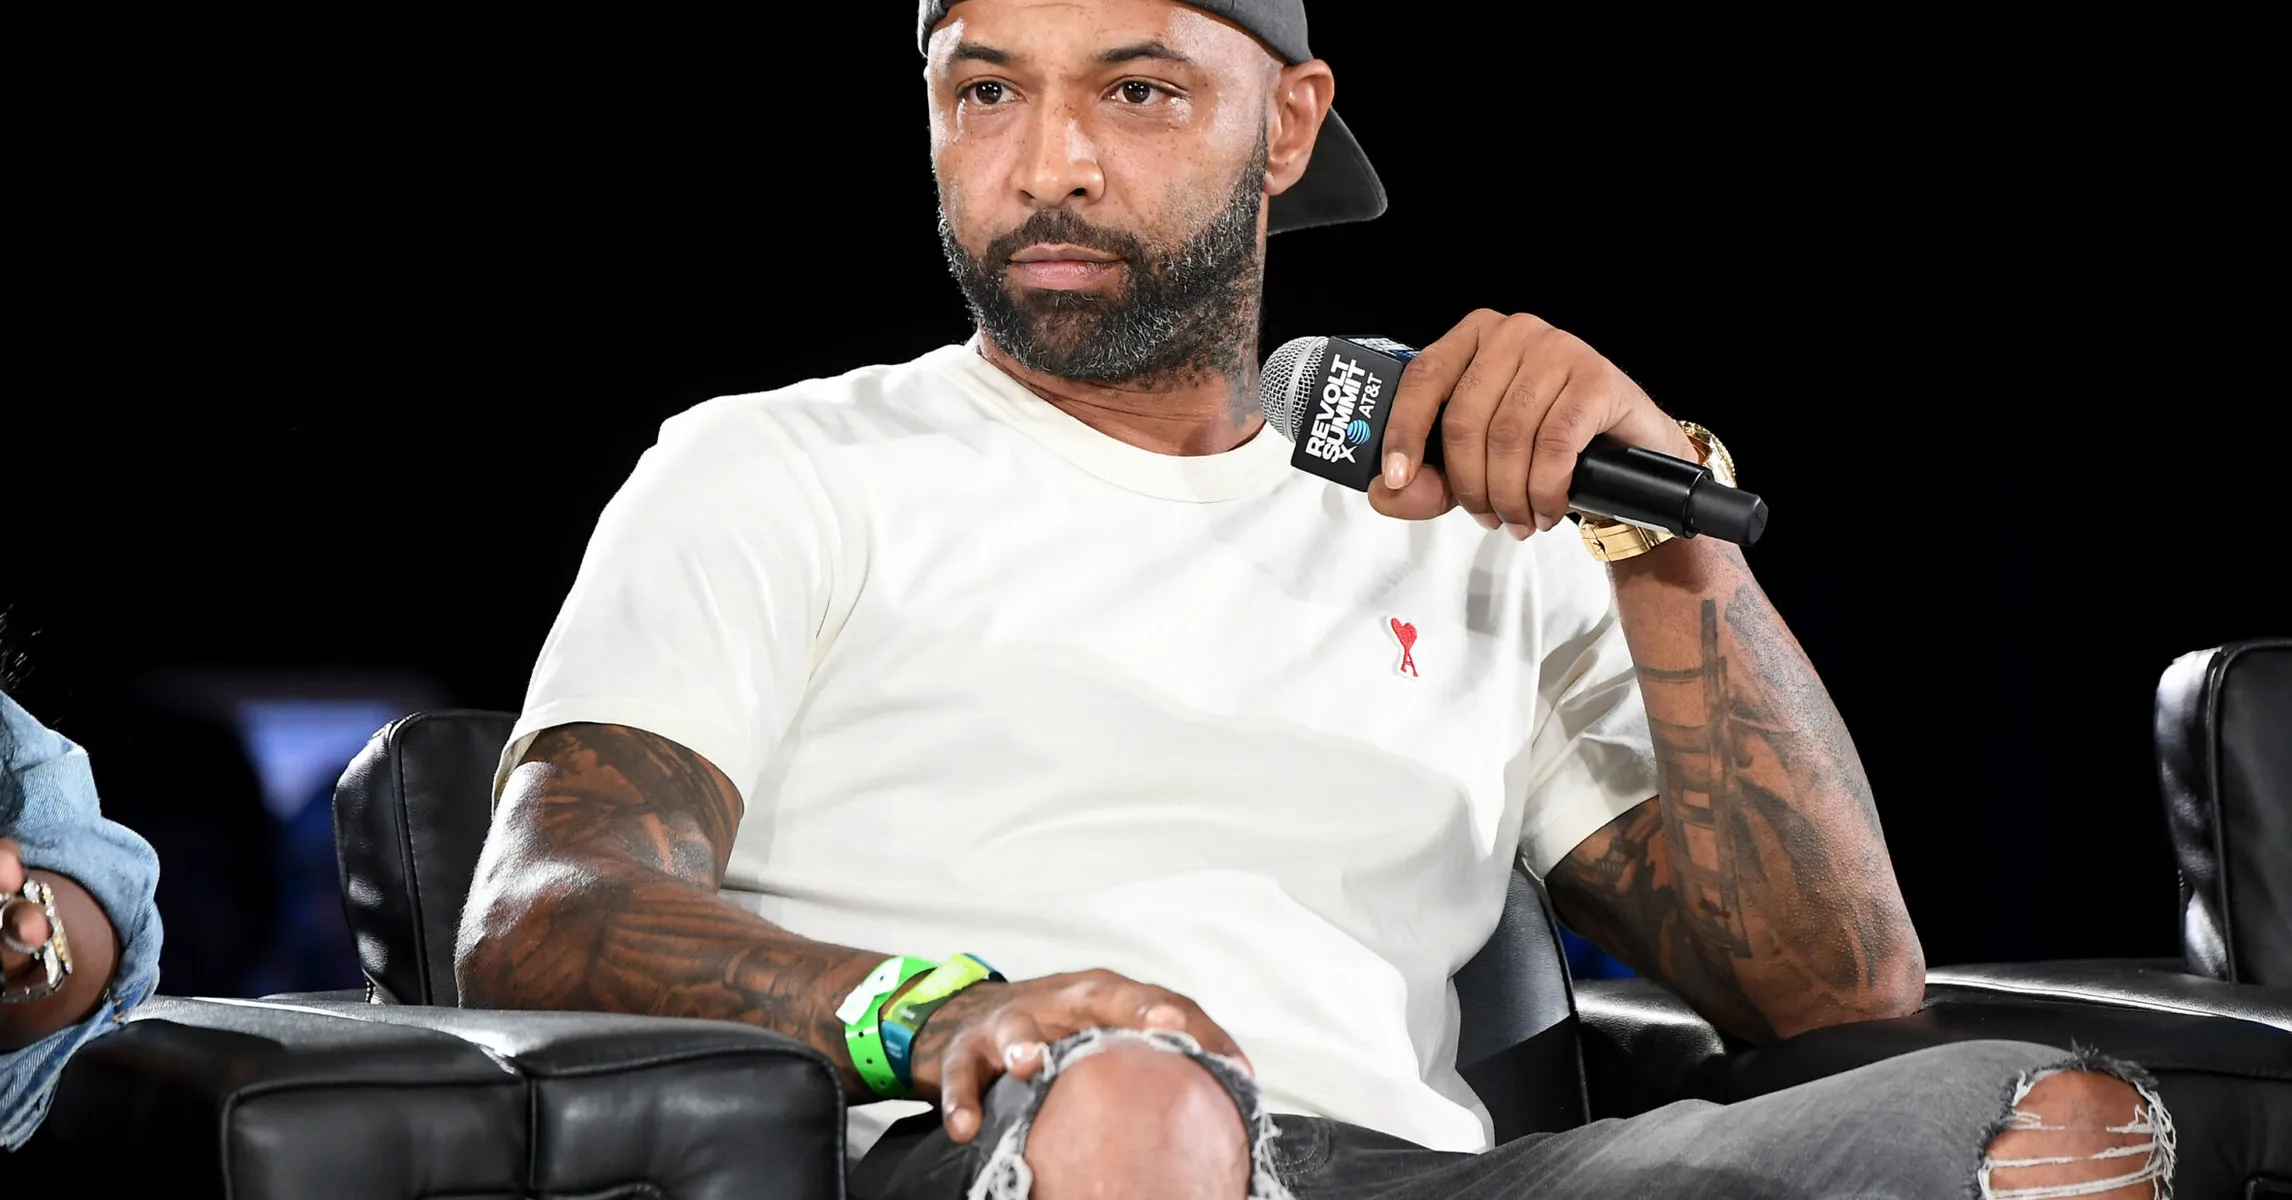 Joe Budden Claps Back At Adam22’s Big Three Rant By Channeling Rick Ross